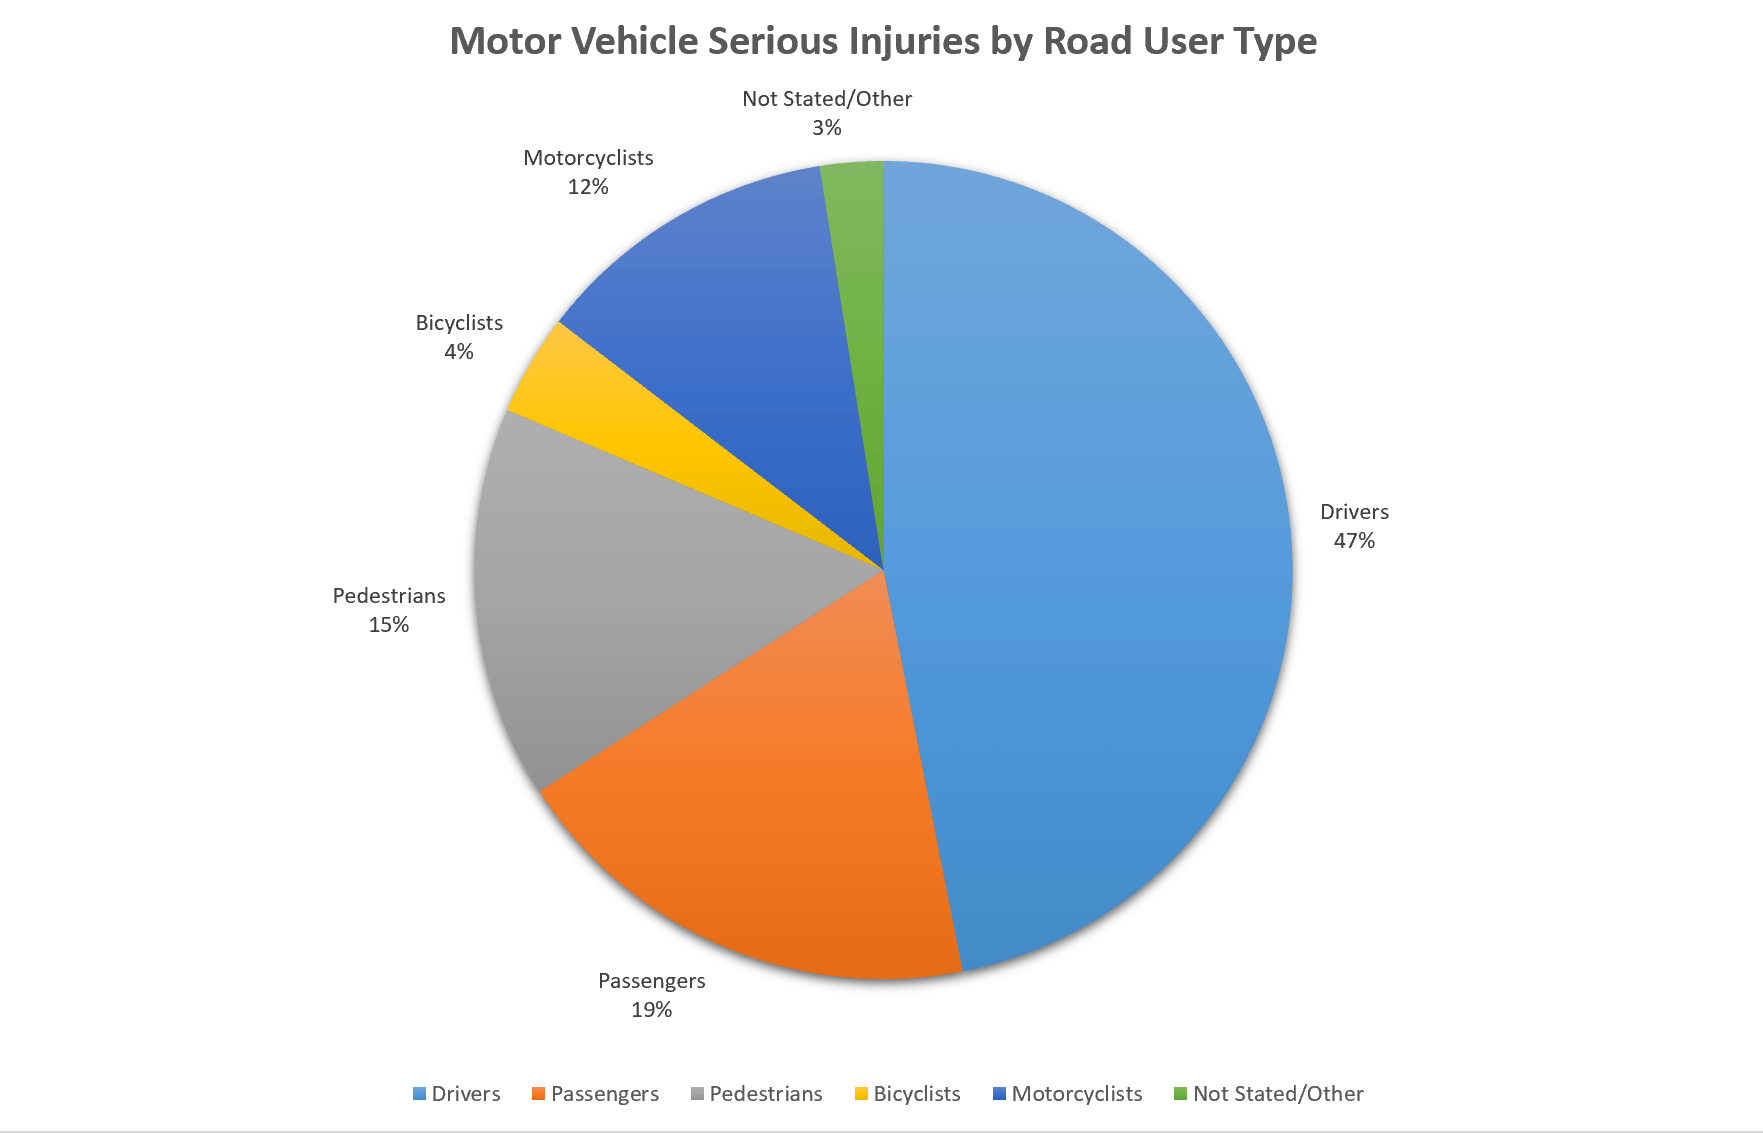 Motor Vehicle Serious Injuries by Road User Type